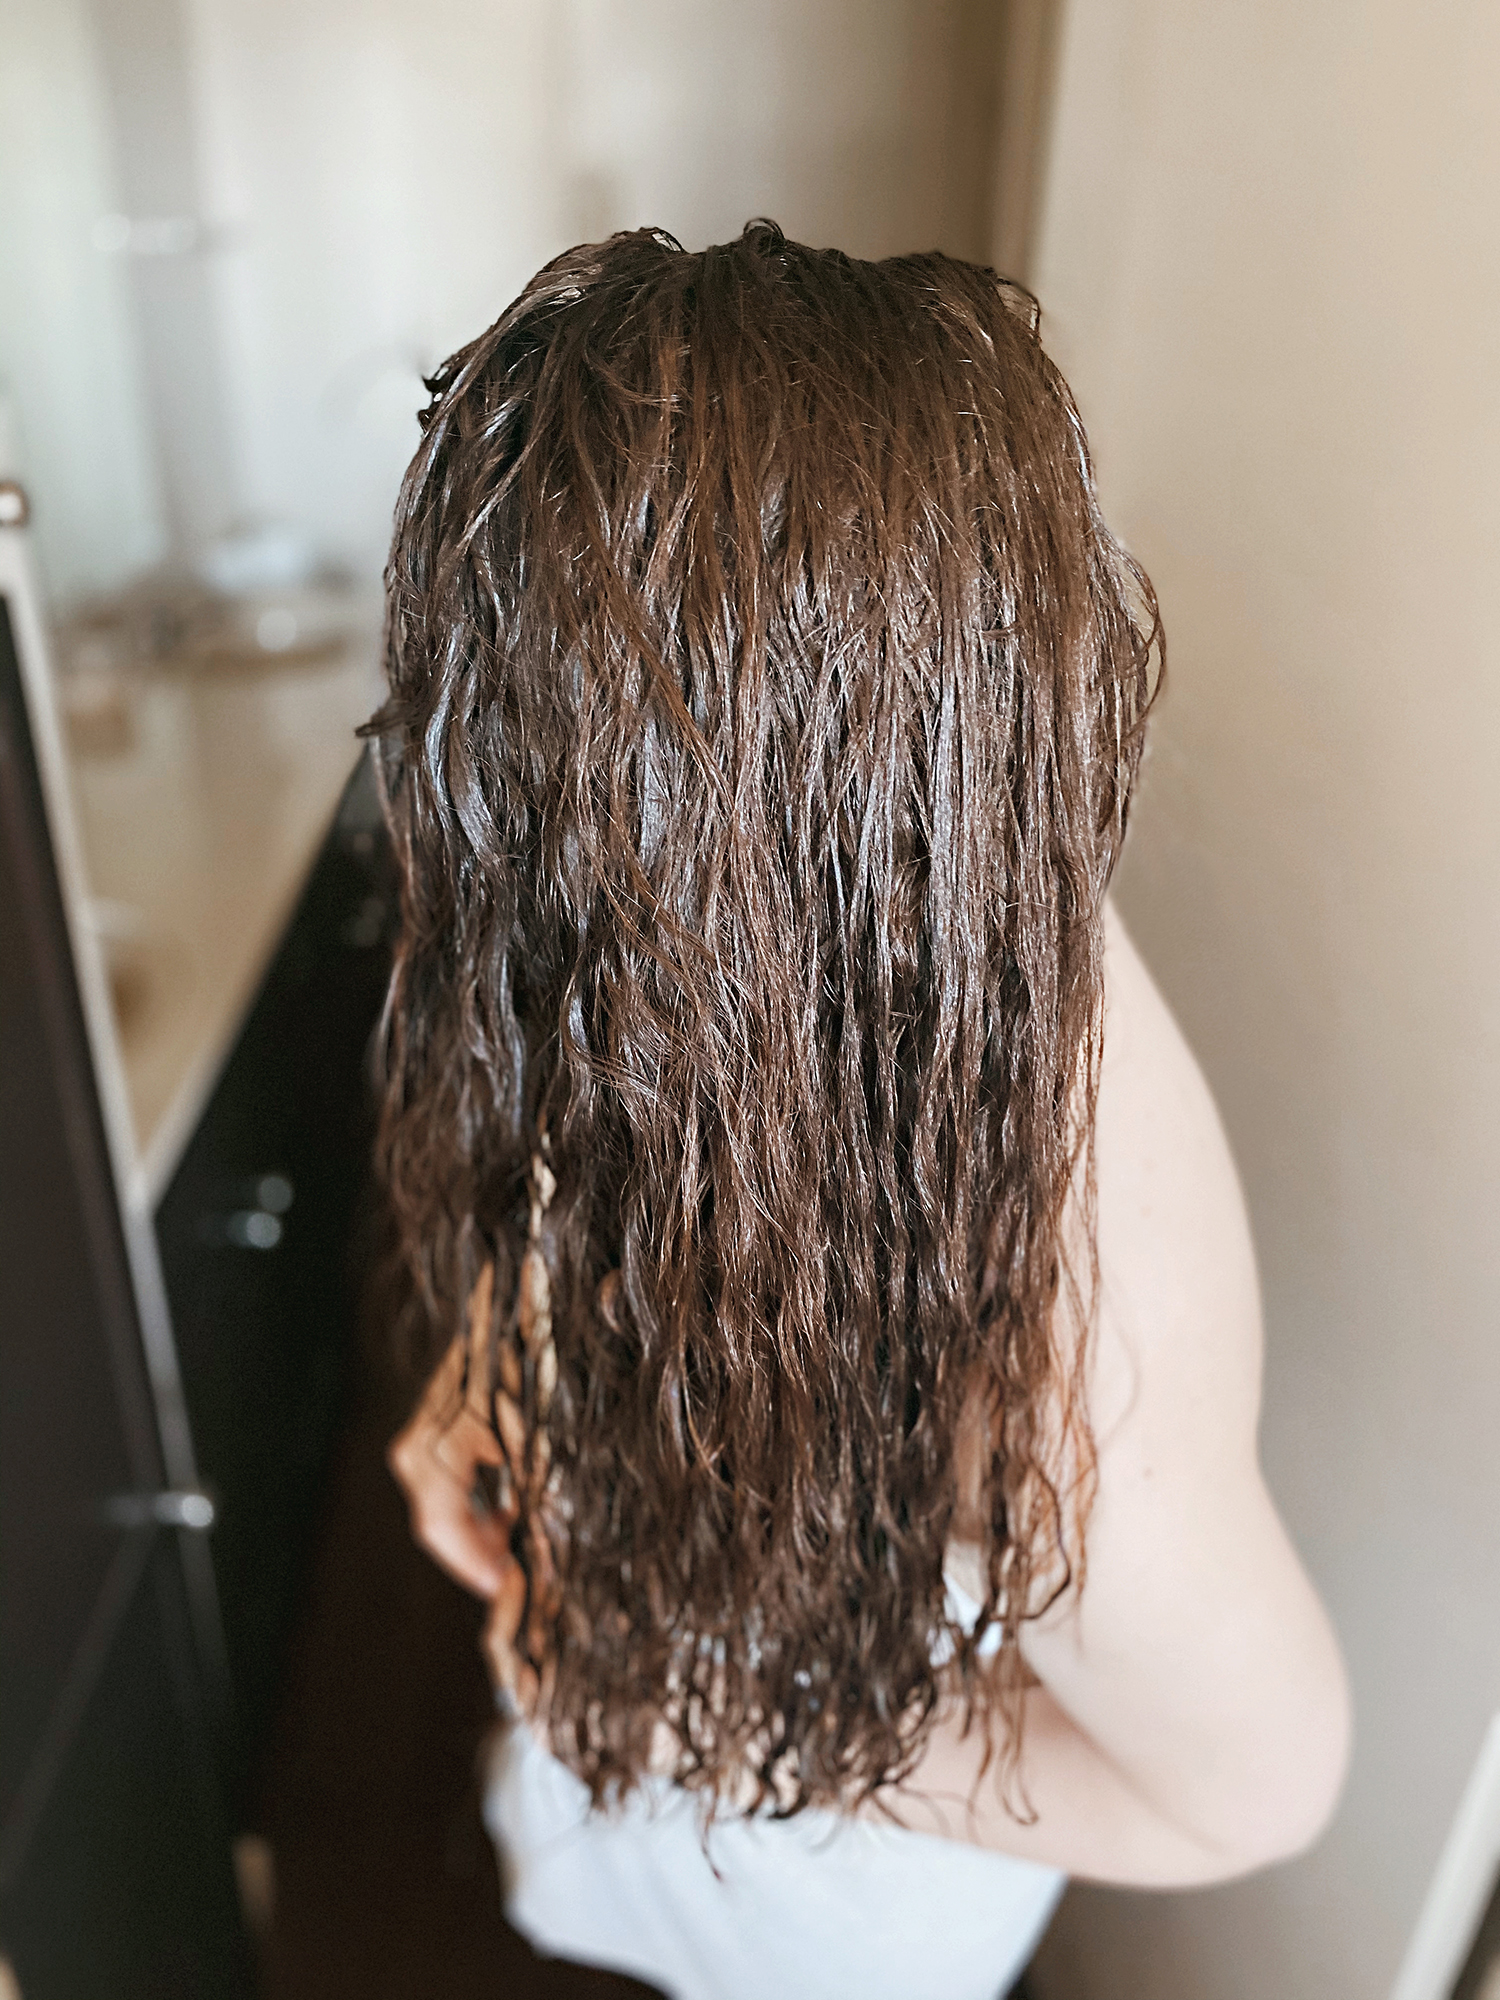 My curly hair journey and embracing my natural curls. I'm sharing part one and where I'm starting after straightening my hair for the last 2 years. Catch it now over on KaraLayne.com!